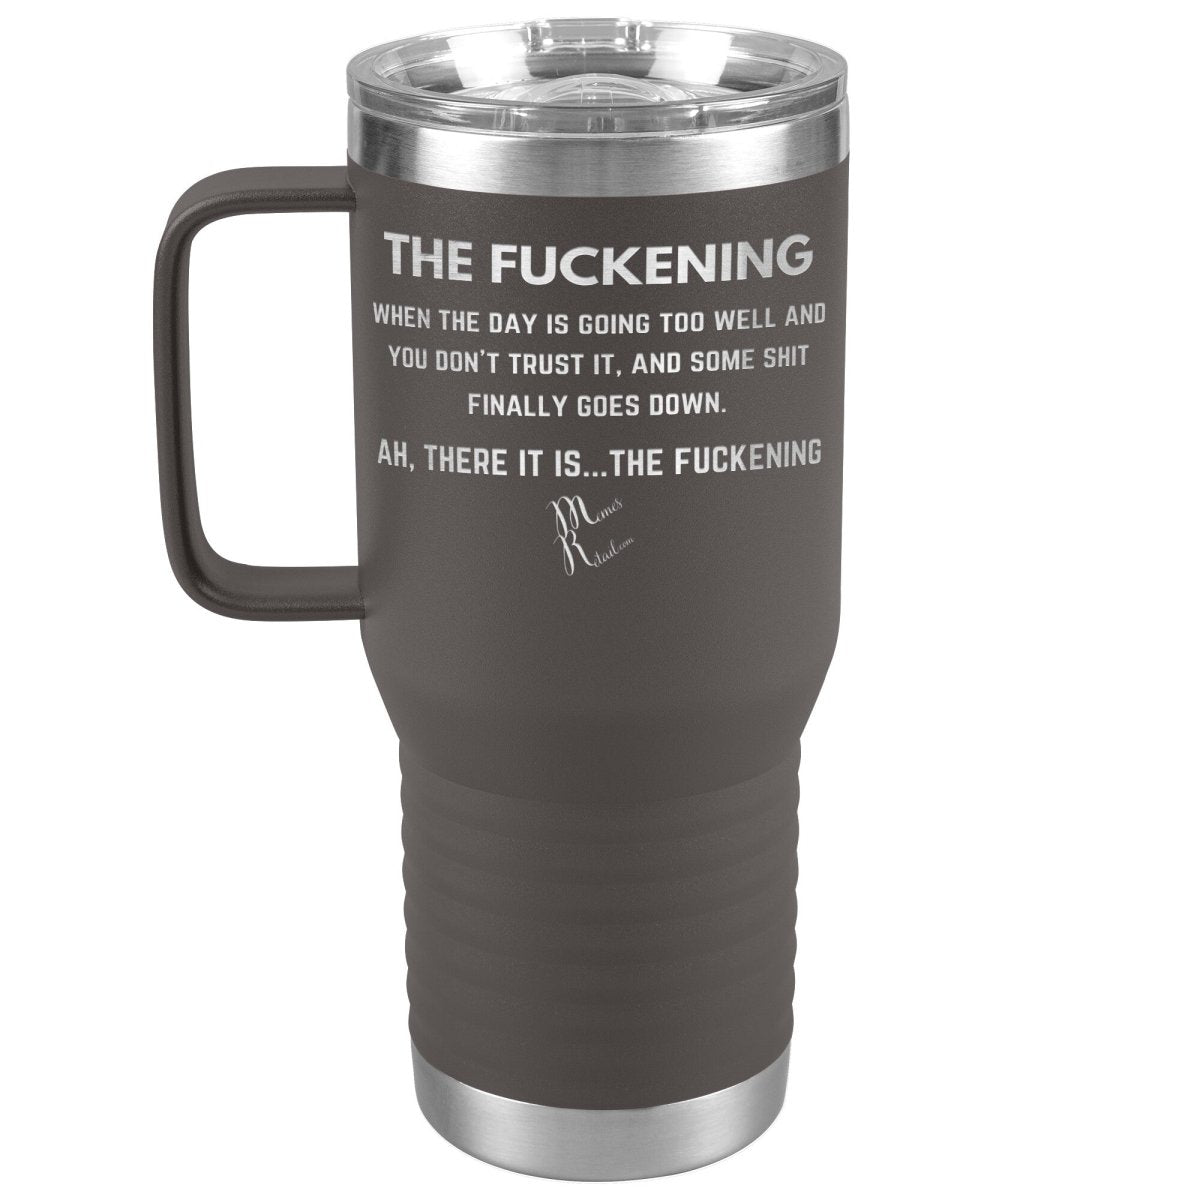 The Fuckening, When you don't trust the day Tumblers, 20oz Travel Tumbler / Pewter - MemesRetail.com